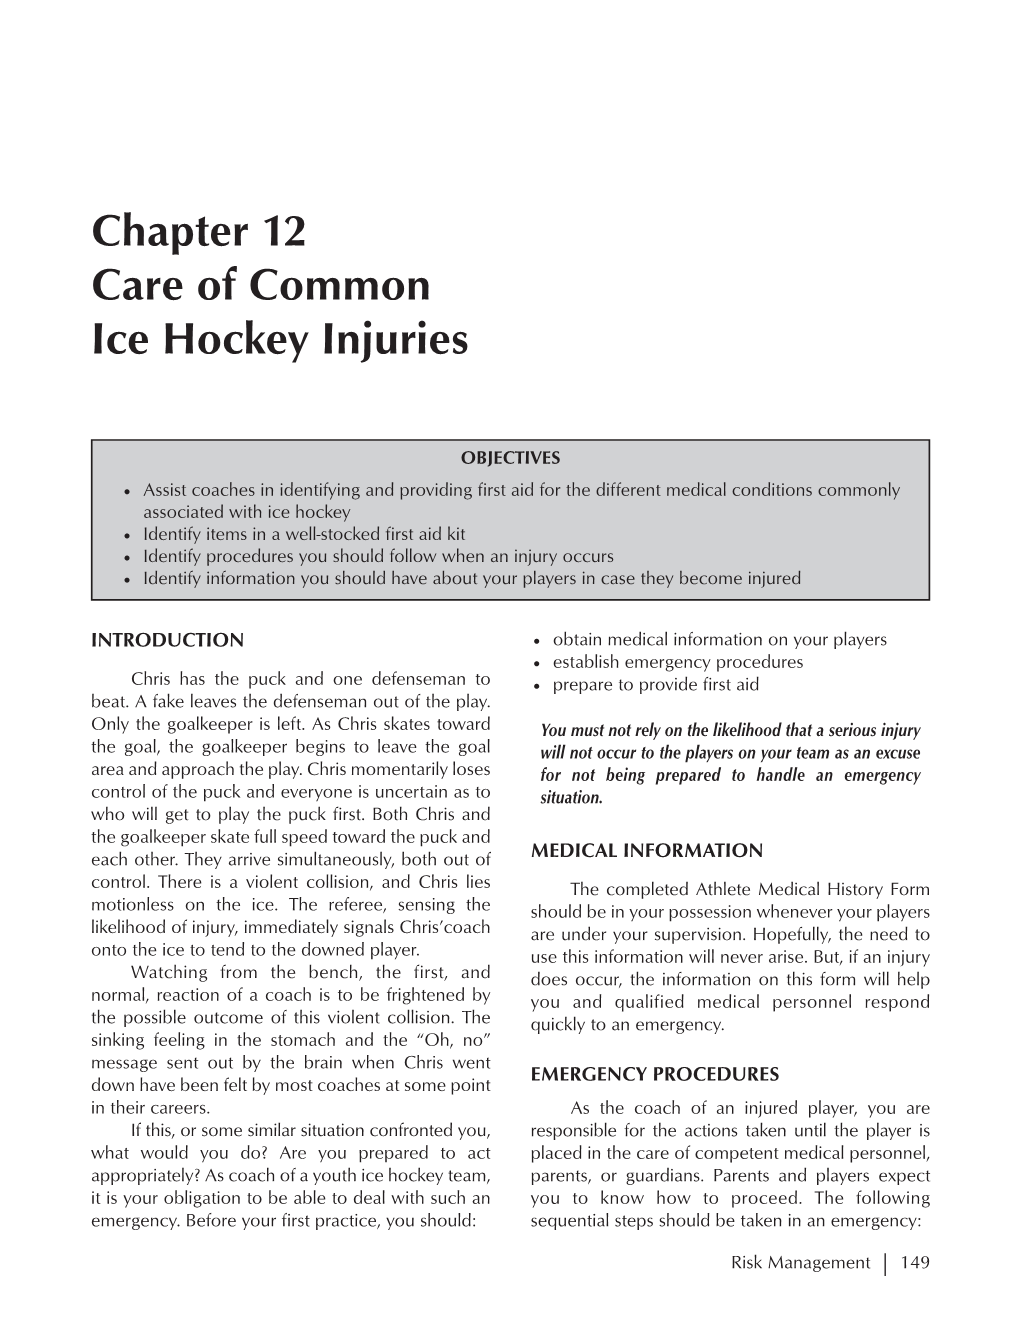 Chapter 12 Care of Common Ice Hockey Injuries